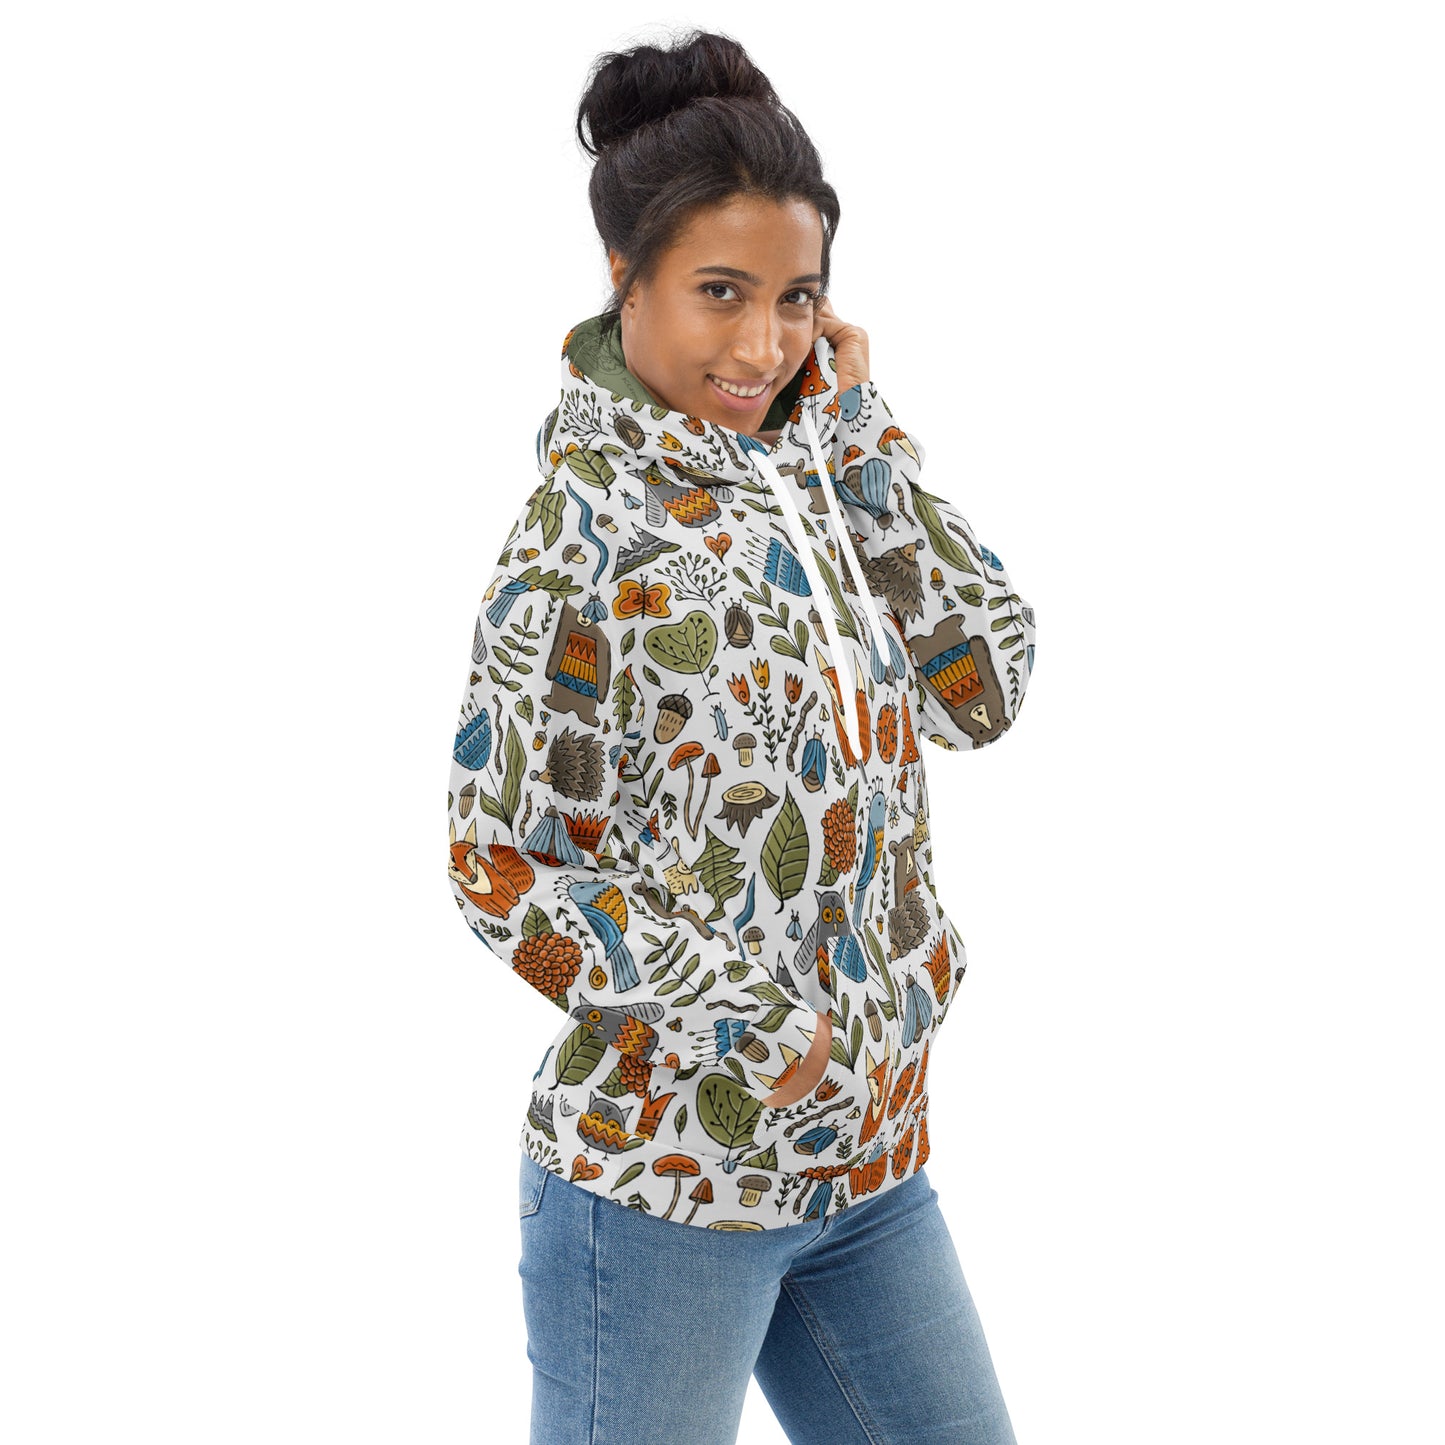 Woman wear in Artistic Designer Hoodie all over print vintage style with magic world illustration of forest  - animals and birds flowers and nature bear fox owls butterflies hedgehog insects mashrooms and trees. Festival comfortable stylish wear trendy fashionable rare beautiful unique. Back side. Kudry